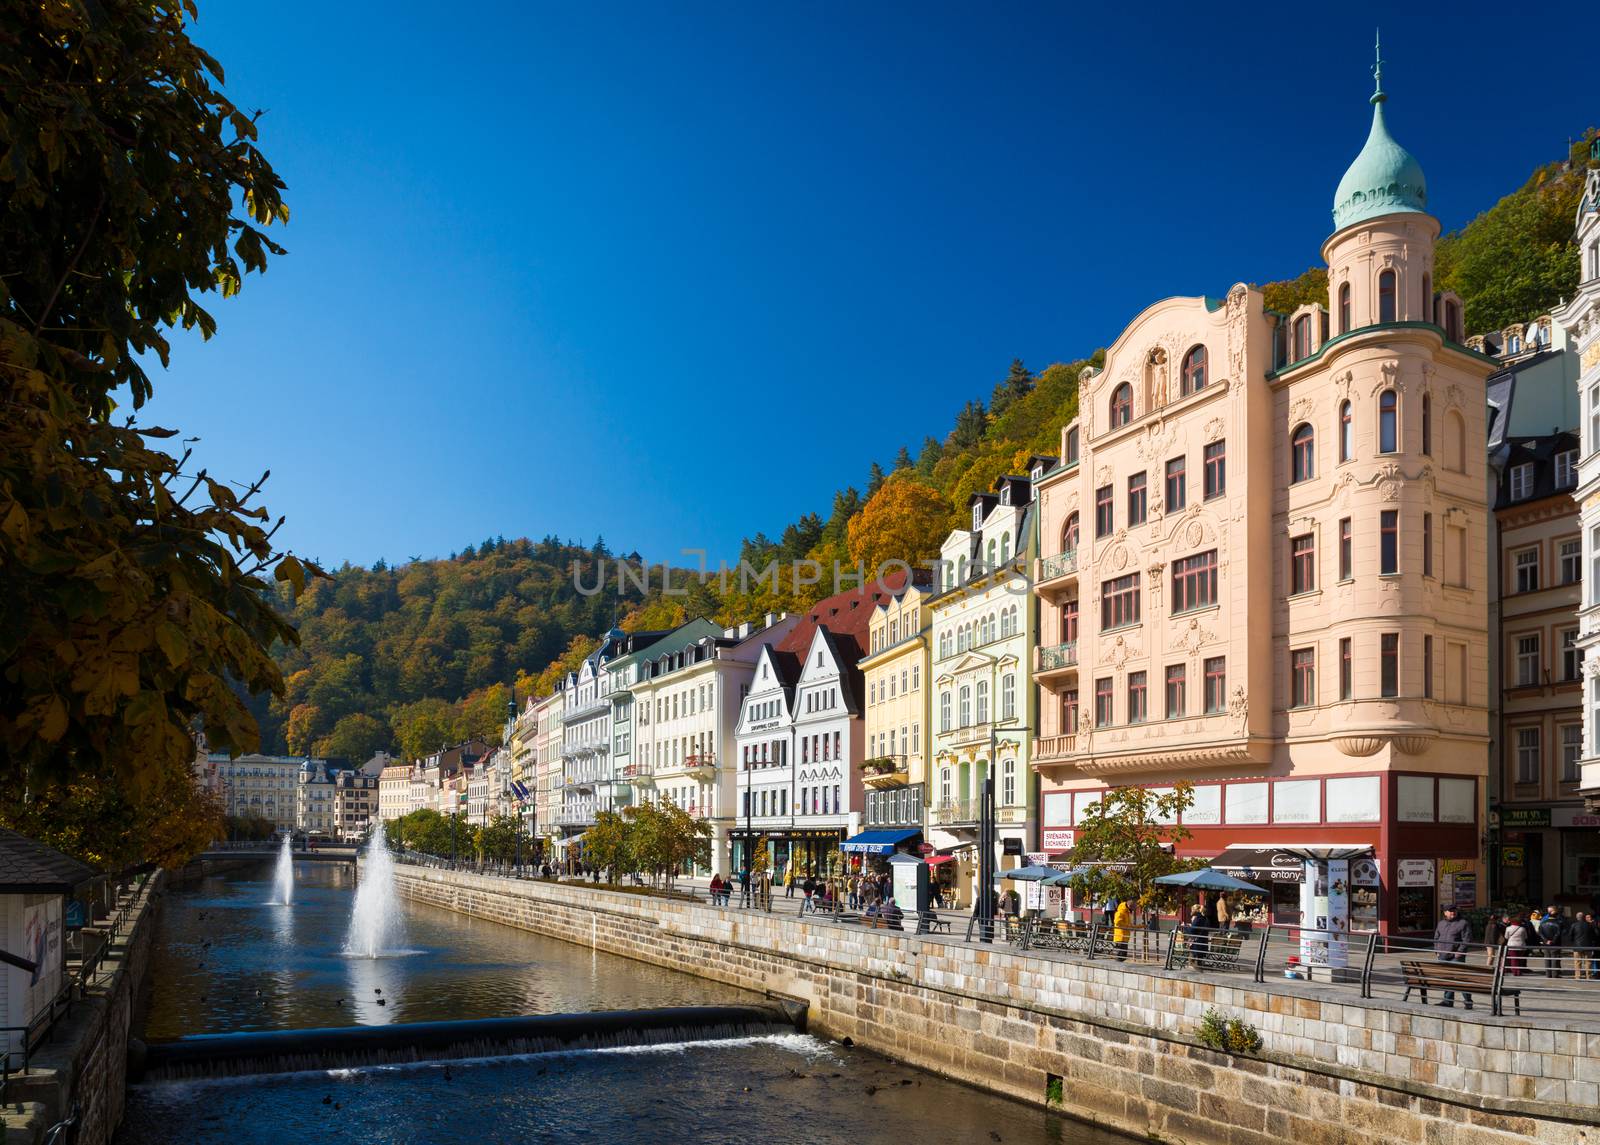 CARLSBAD, CZECH REPUBLIC - OCTOBER 10, 2015 - The historic city of Carlsbad is one of the most famous spa towns in Europe